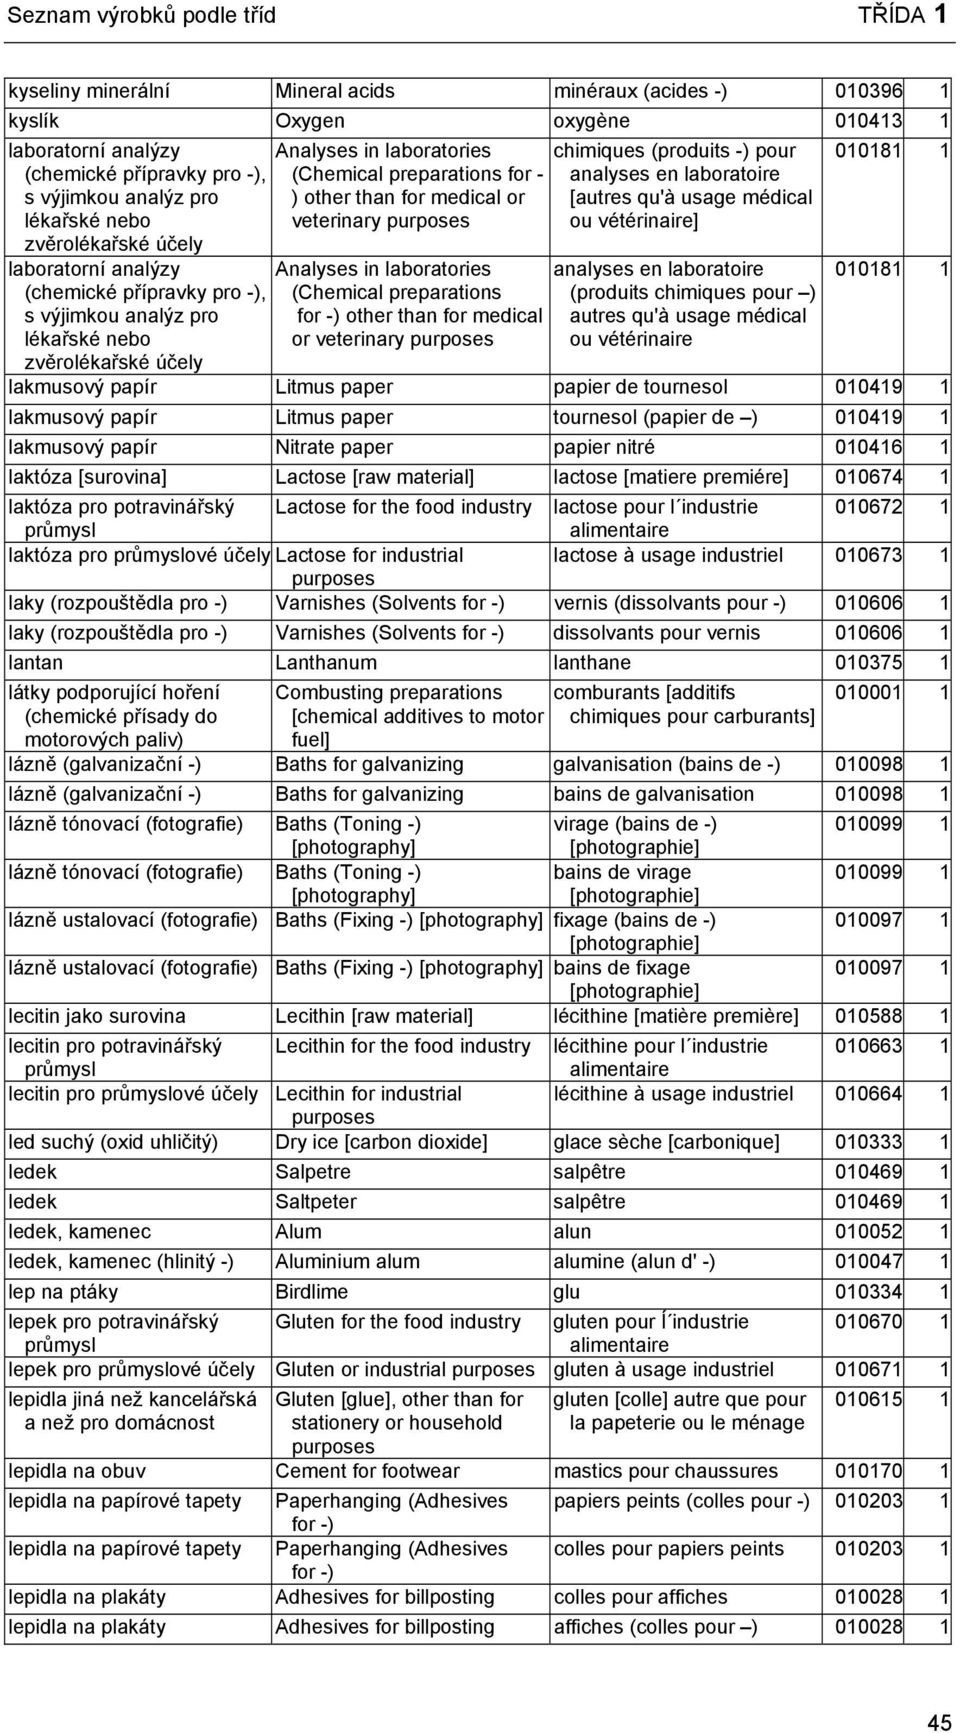 than for medical or veterinary Analyses in laboratories (Chemical preparations for -) other than for medical or veterinary chimiques (produits -) pour analyses en laboratoire [autres qu'à usage